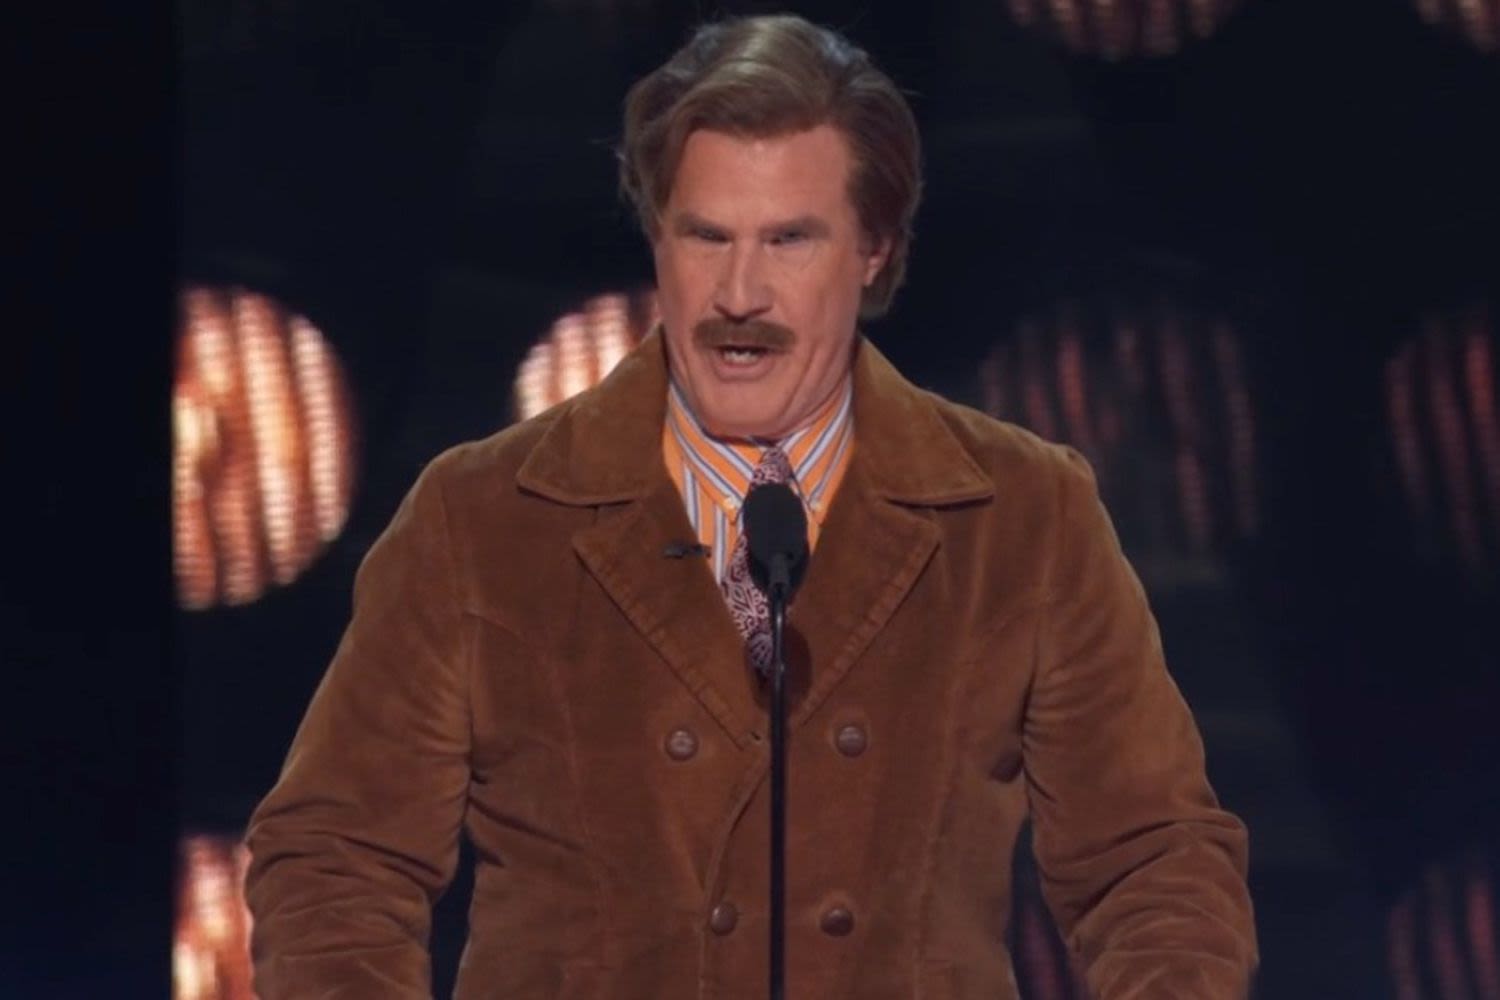 Ron Burgundy Returns! Will Ferrell Reprises “Anchorman ”Role to Roast Tom Brady: 'I Never Liked You'